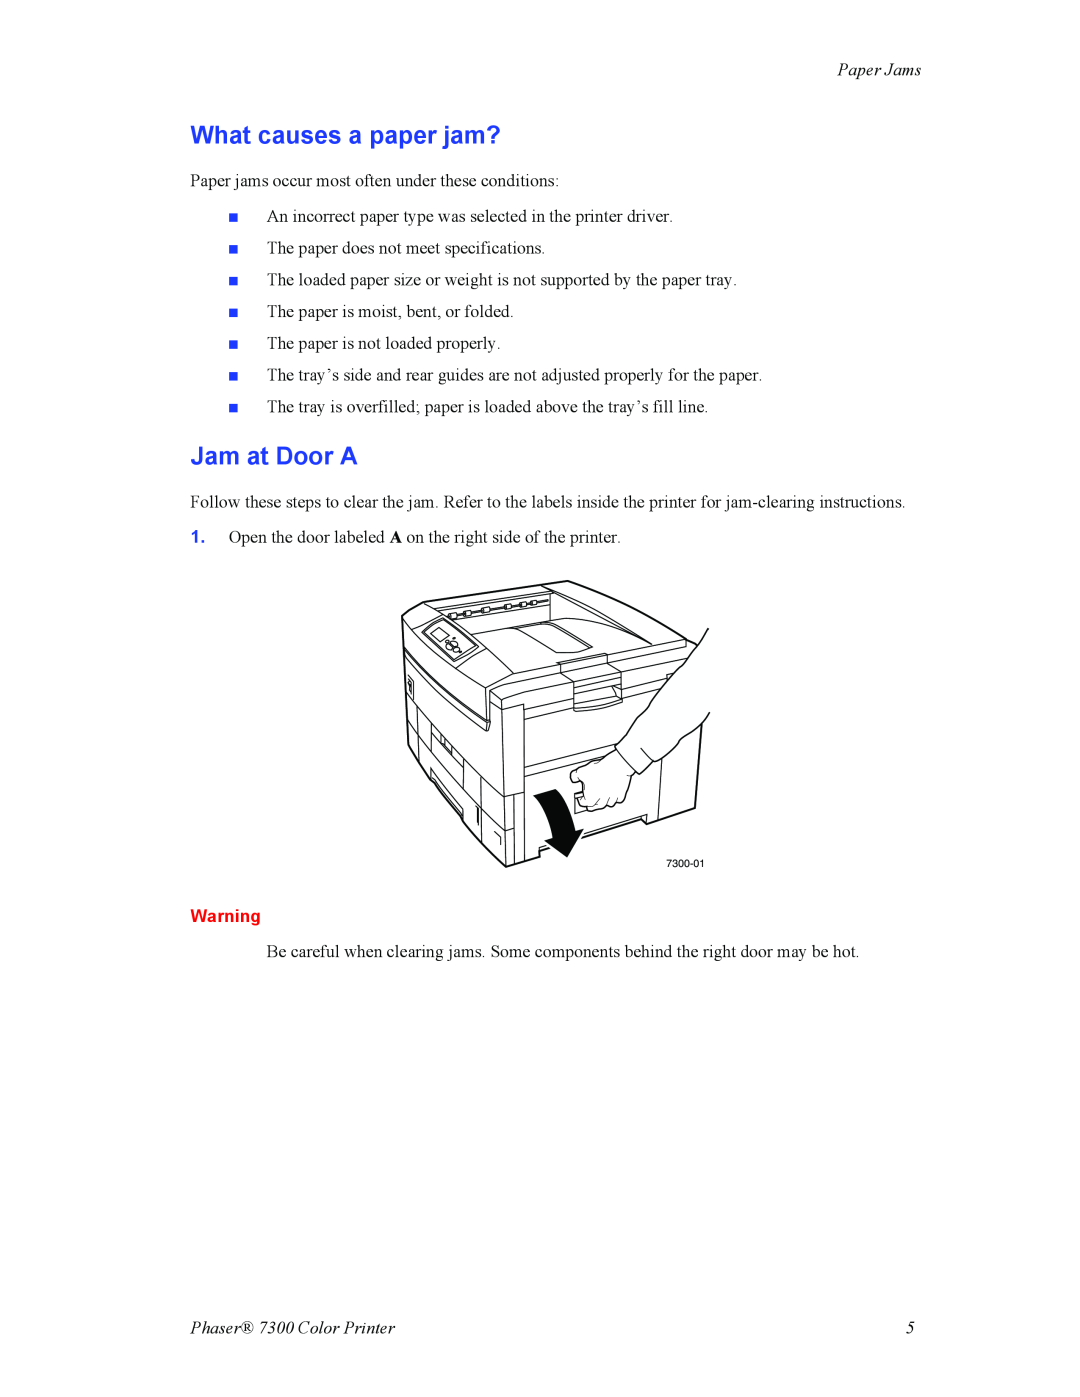 Xerox manual What causes a paper jam?, Jam at Door A, Paper Jams, Phaser 7300 Color Printer 